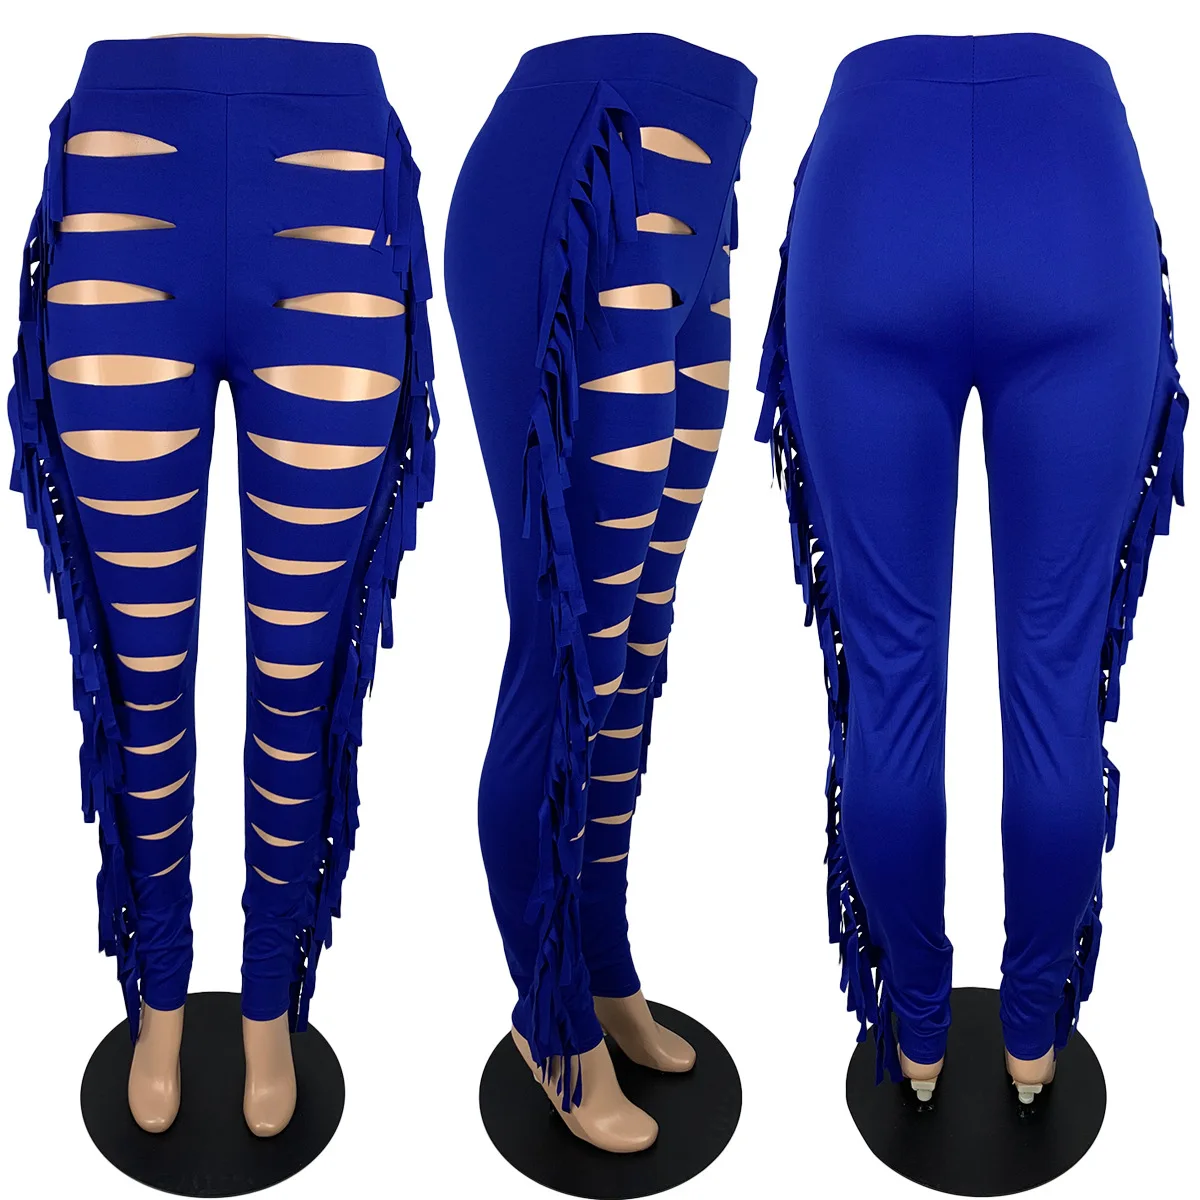 Hirigin Womens High Waist Ripped Capris With Gold Chain Pencil Pants Black  Slim Fit Cut Out Leggings For Casual Fashion T230825 From Catherine002,  $2.85 | DHgate.Com